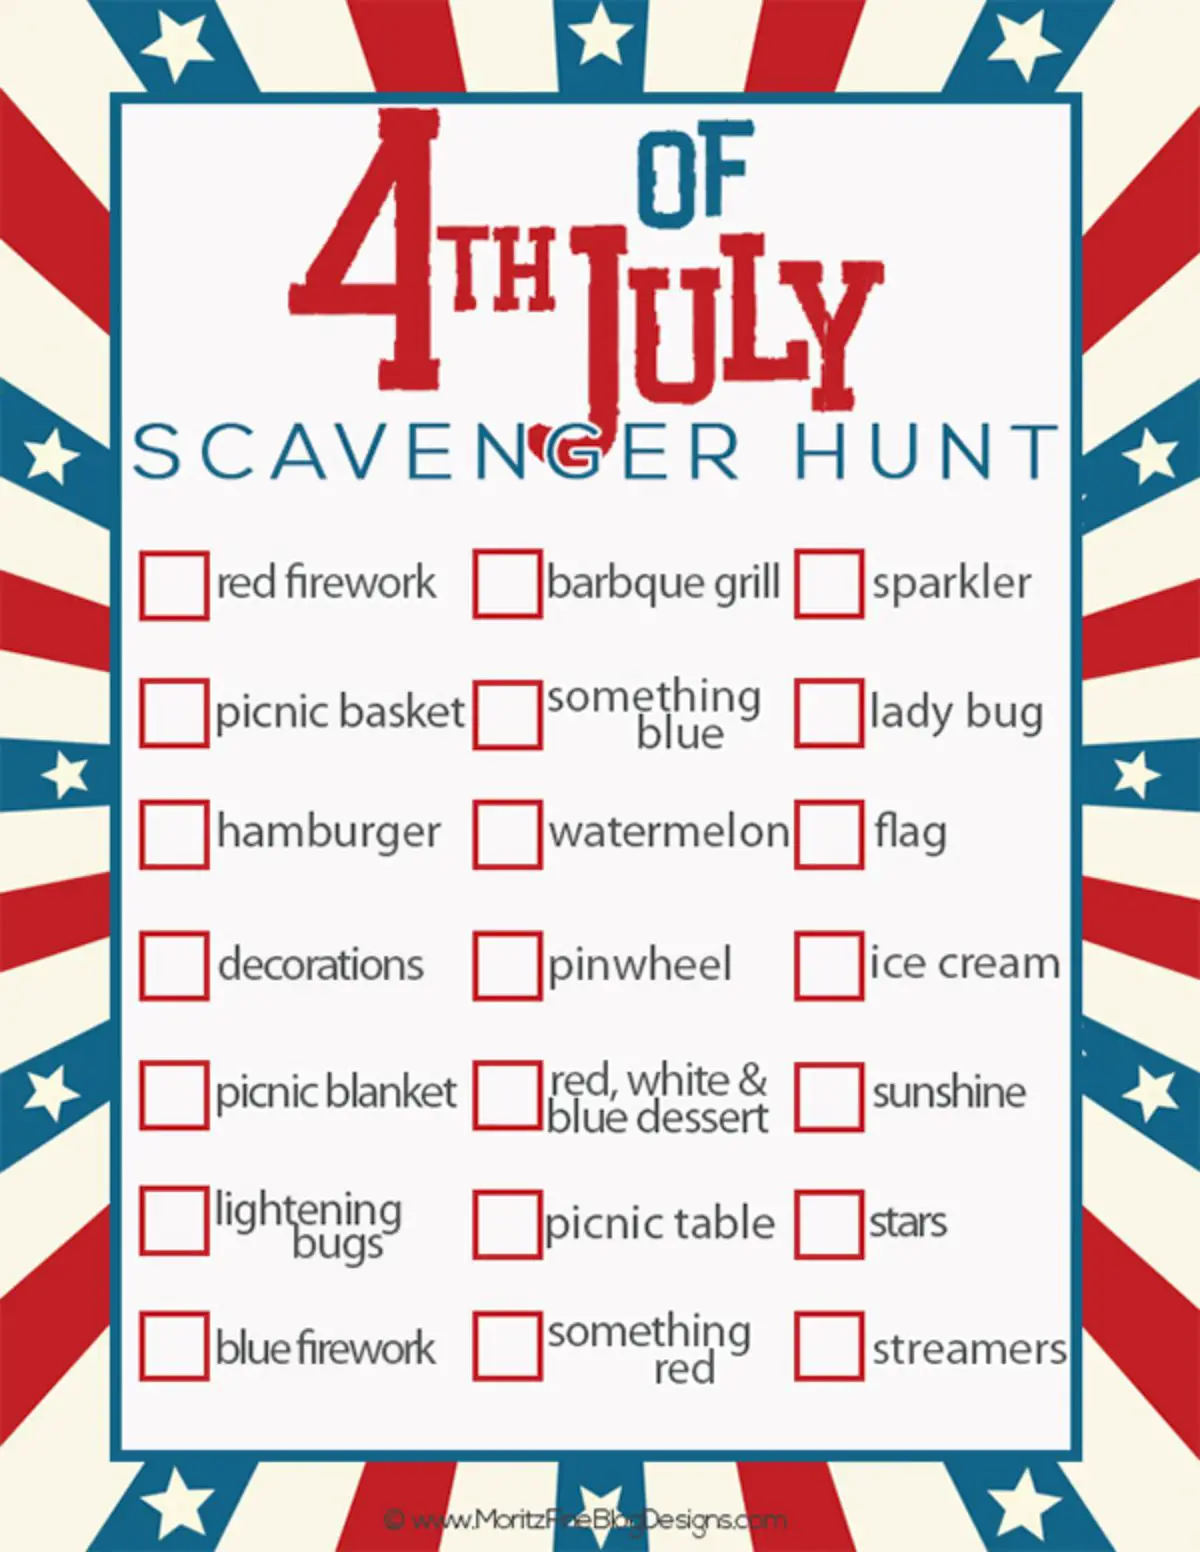 Start a 4th of July tradition where you do a scavenger hunt